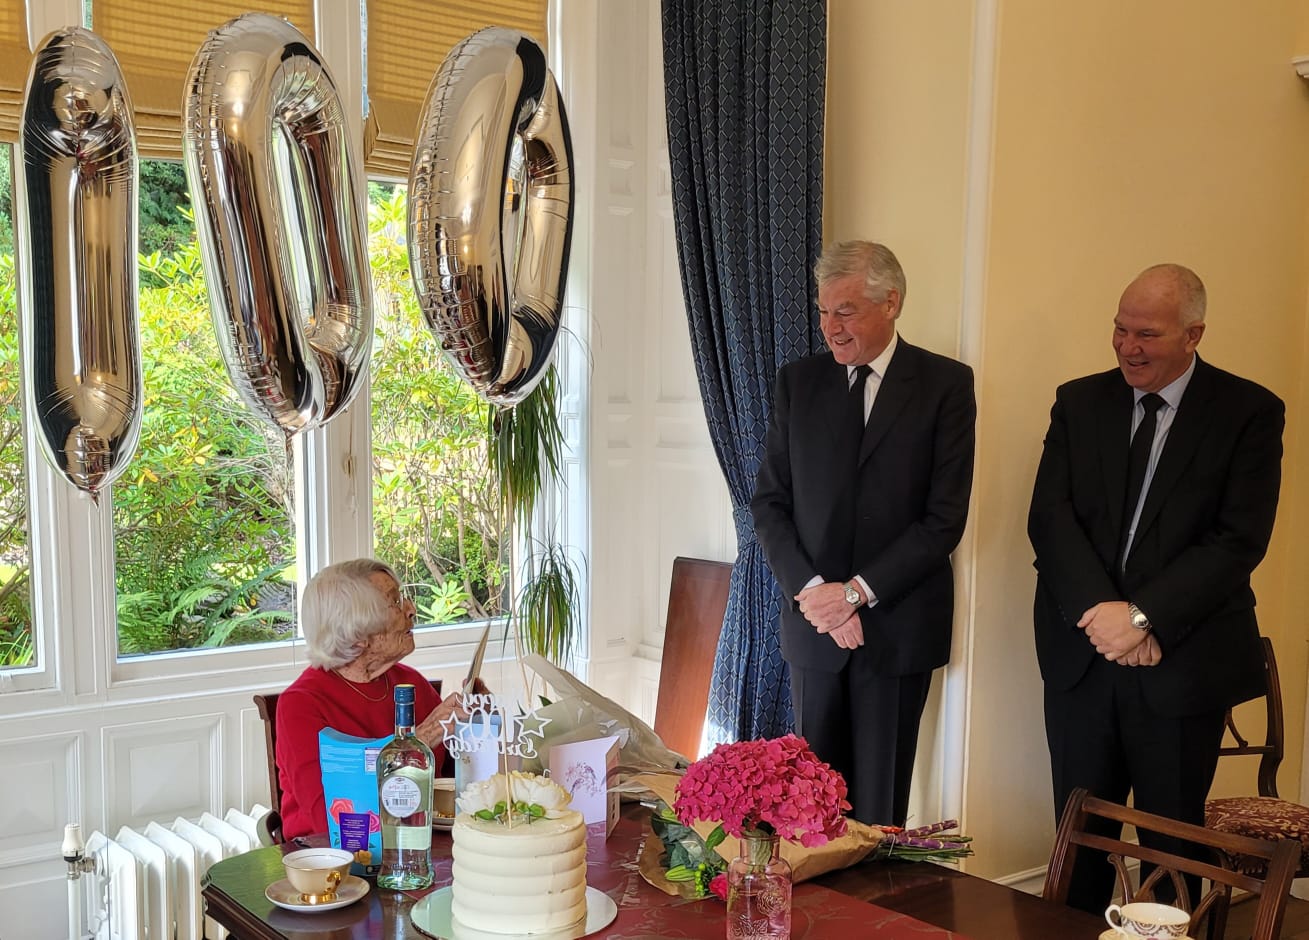 To mark the special occasion, the home's activities manager Tracy McEown arranged for some special visitors to surprise her with the message from the new monarch.